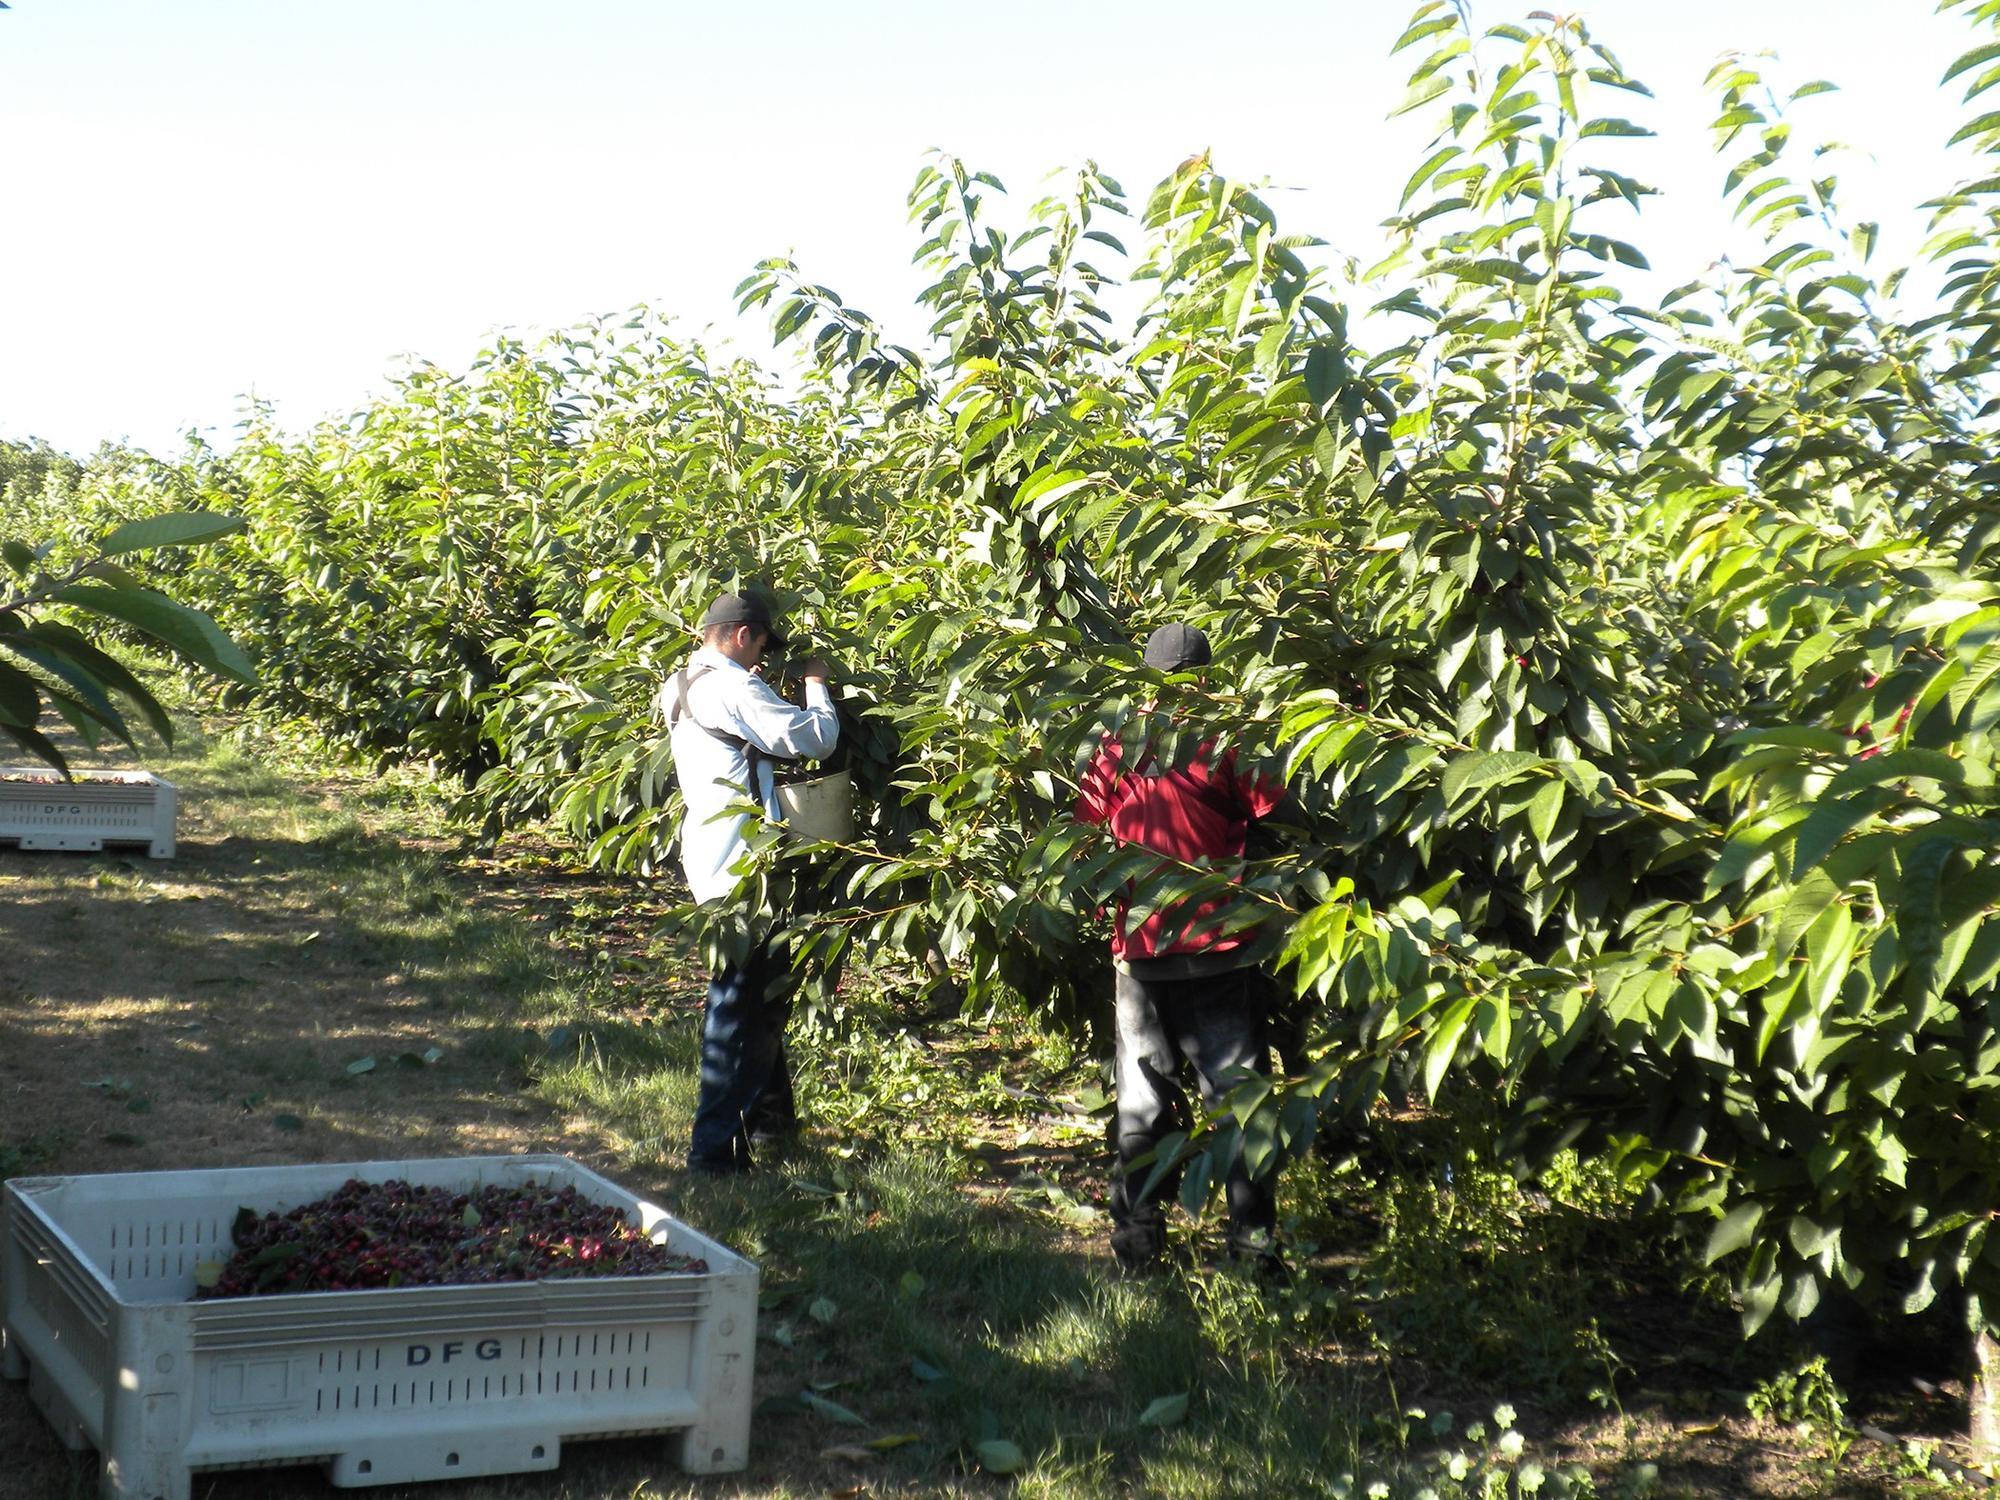 Workers pick cherries in an orchard.